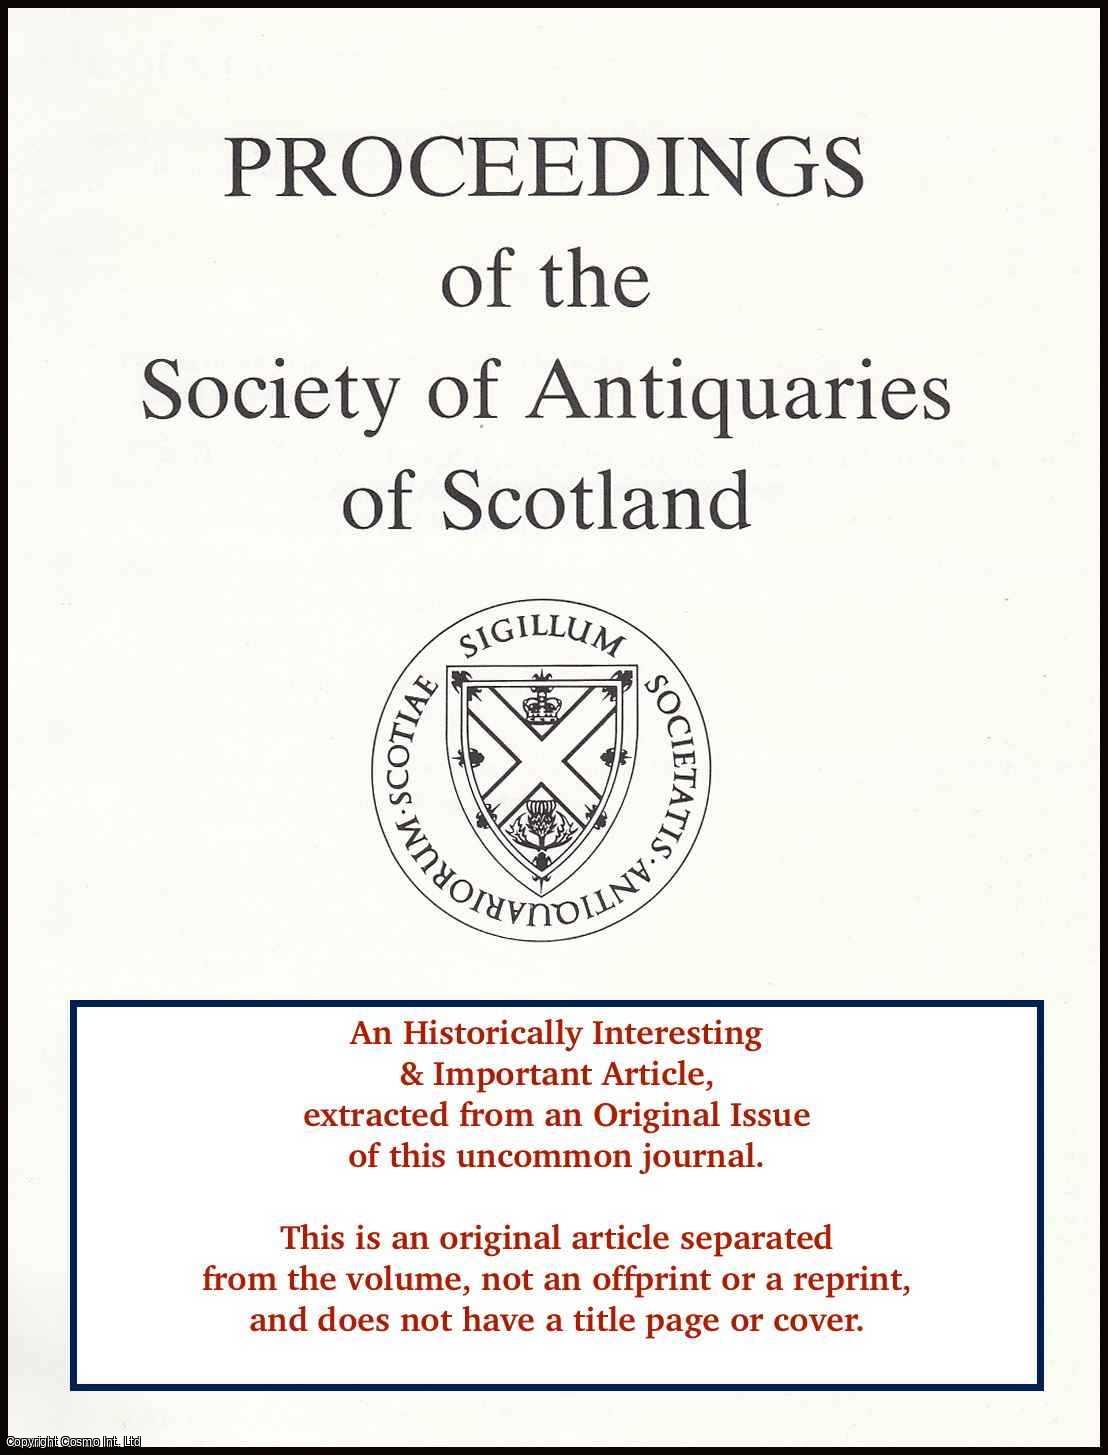 J. Romilly Allen - Preliminary List of Sculptured Stones Older than A.D. 110. An original article from the Proceedings of the Society of Antiquaries of Scotland, 1889-90.